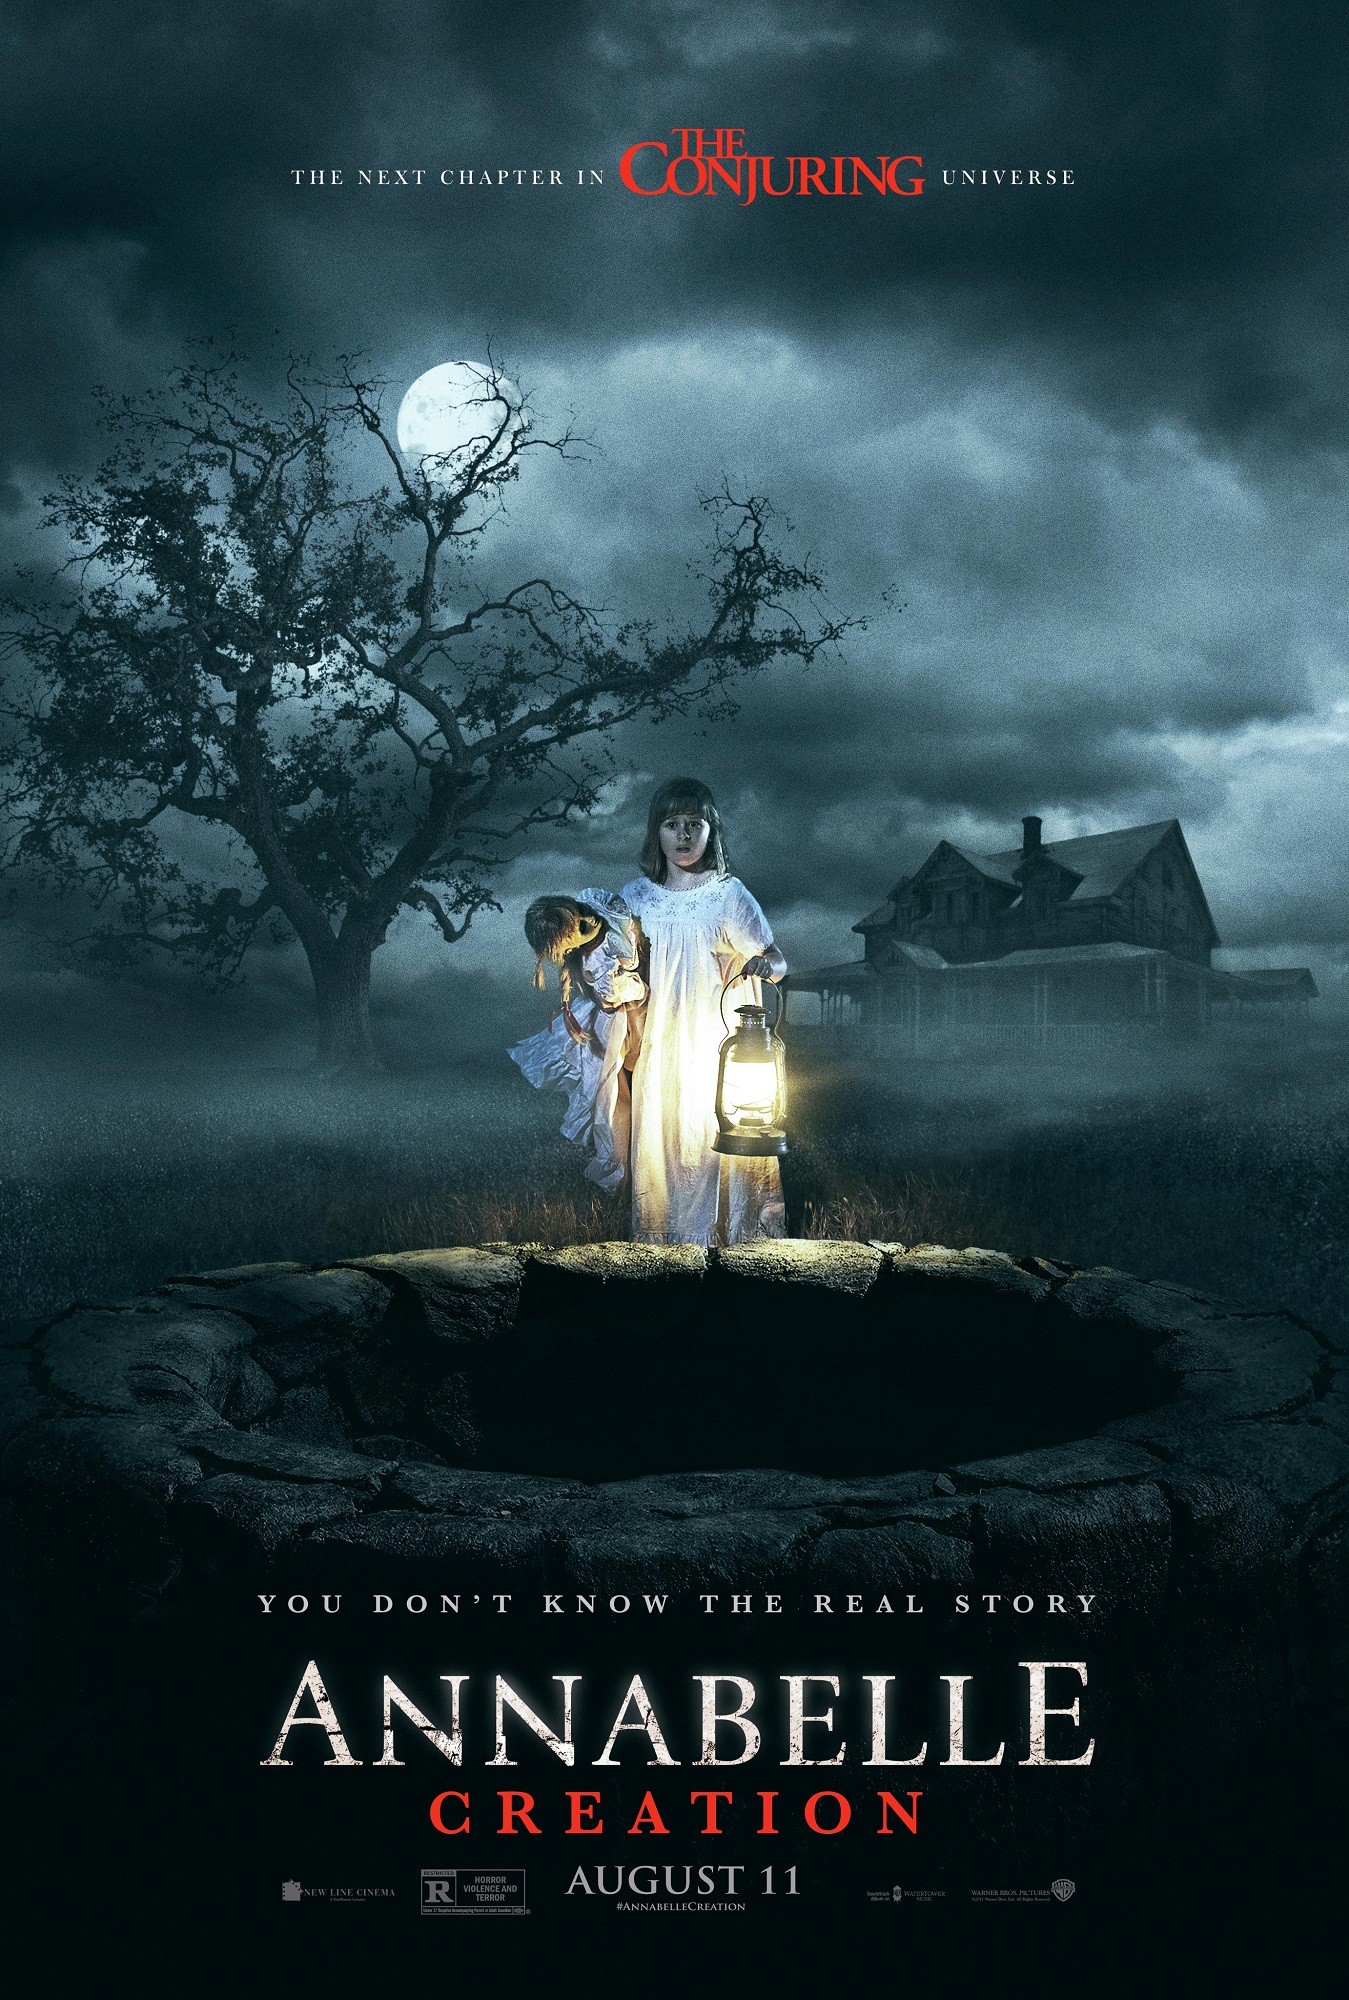 Annabelle: Creation – New Poster and Trailer Tonight!